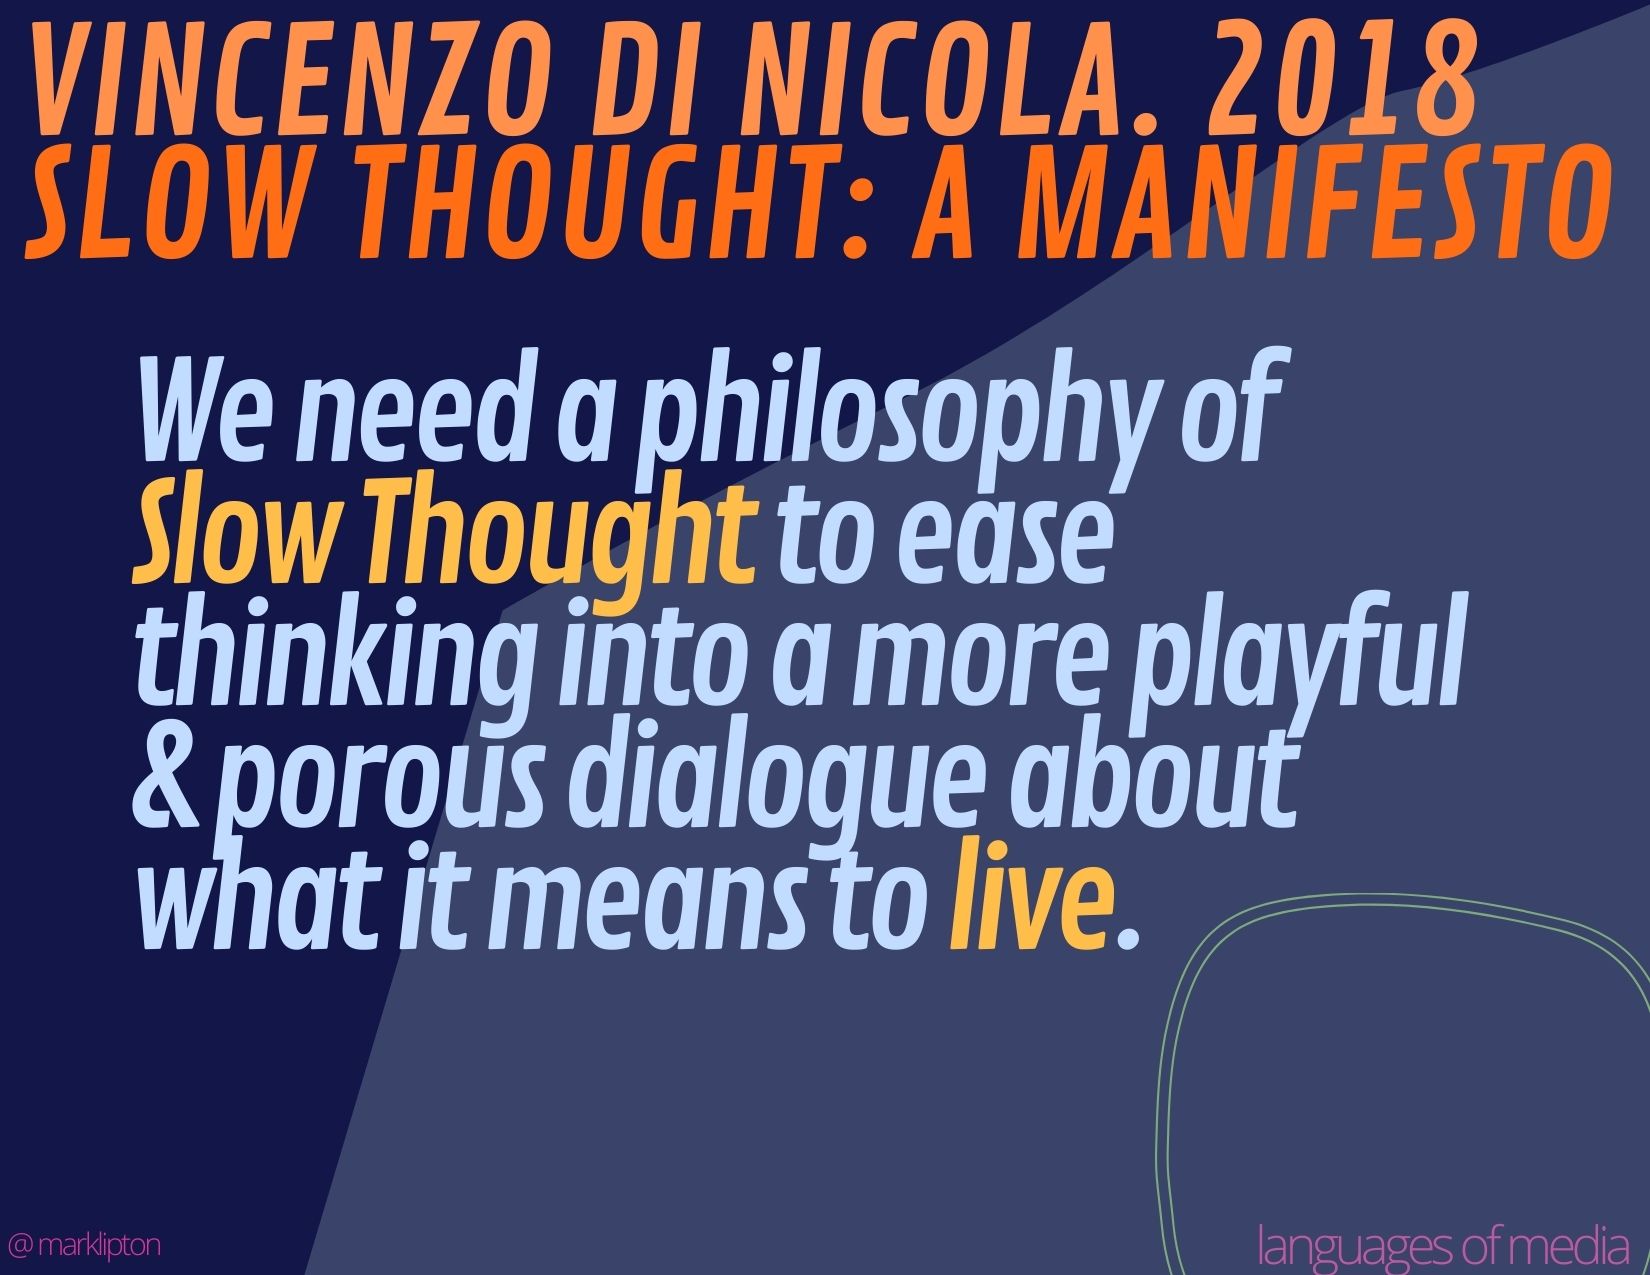 We need a philosophy of Slow Thought to ease thinking into a more playful & porous dialogue about what it means to live.